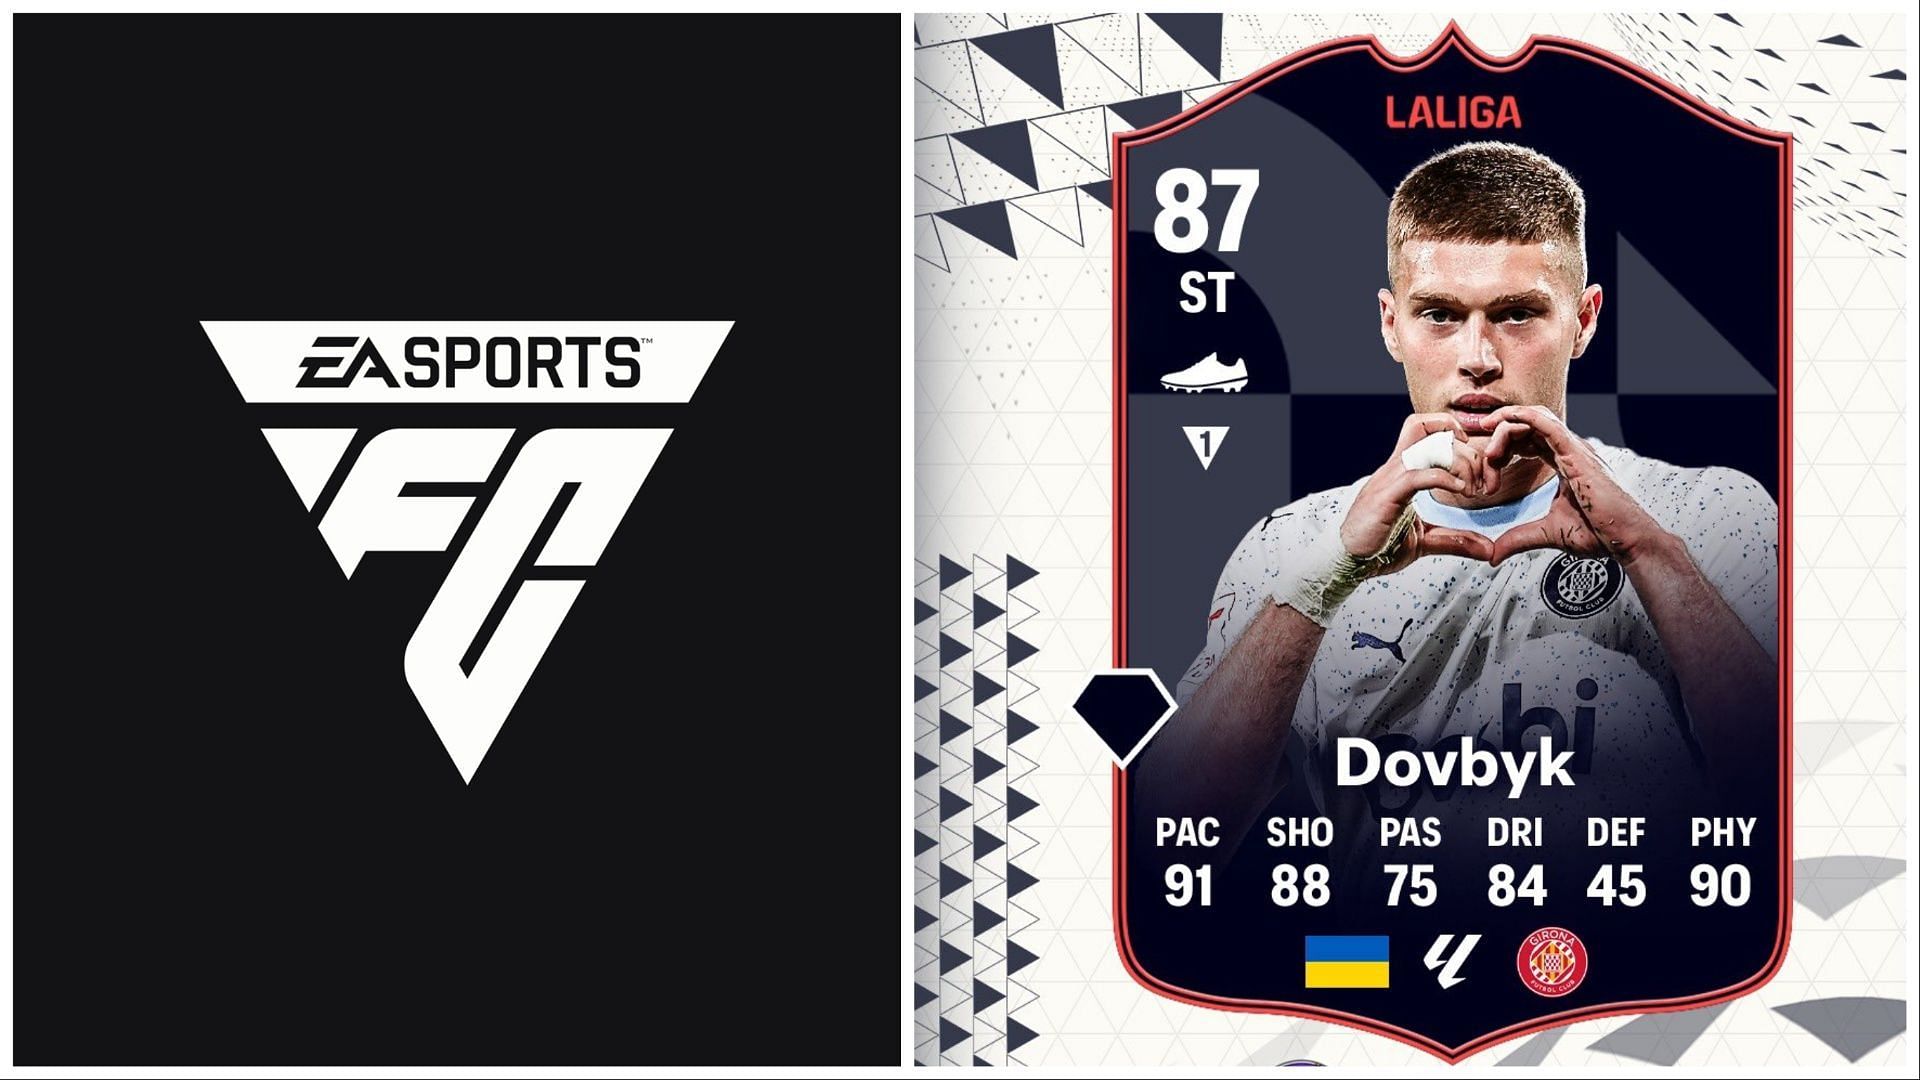 POTM Dovbyk has been leaked (Images via EA Sports and Twitter/FIFATradingRomania)